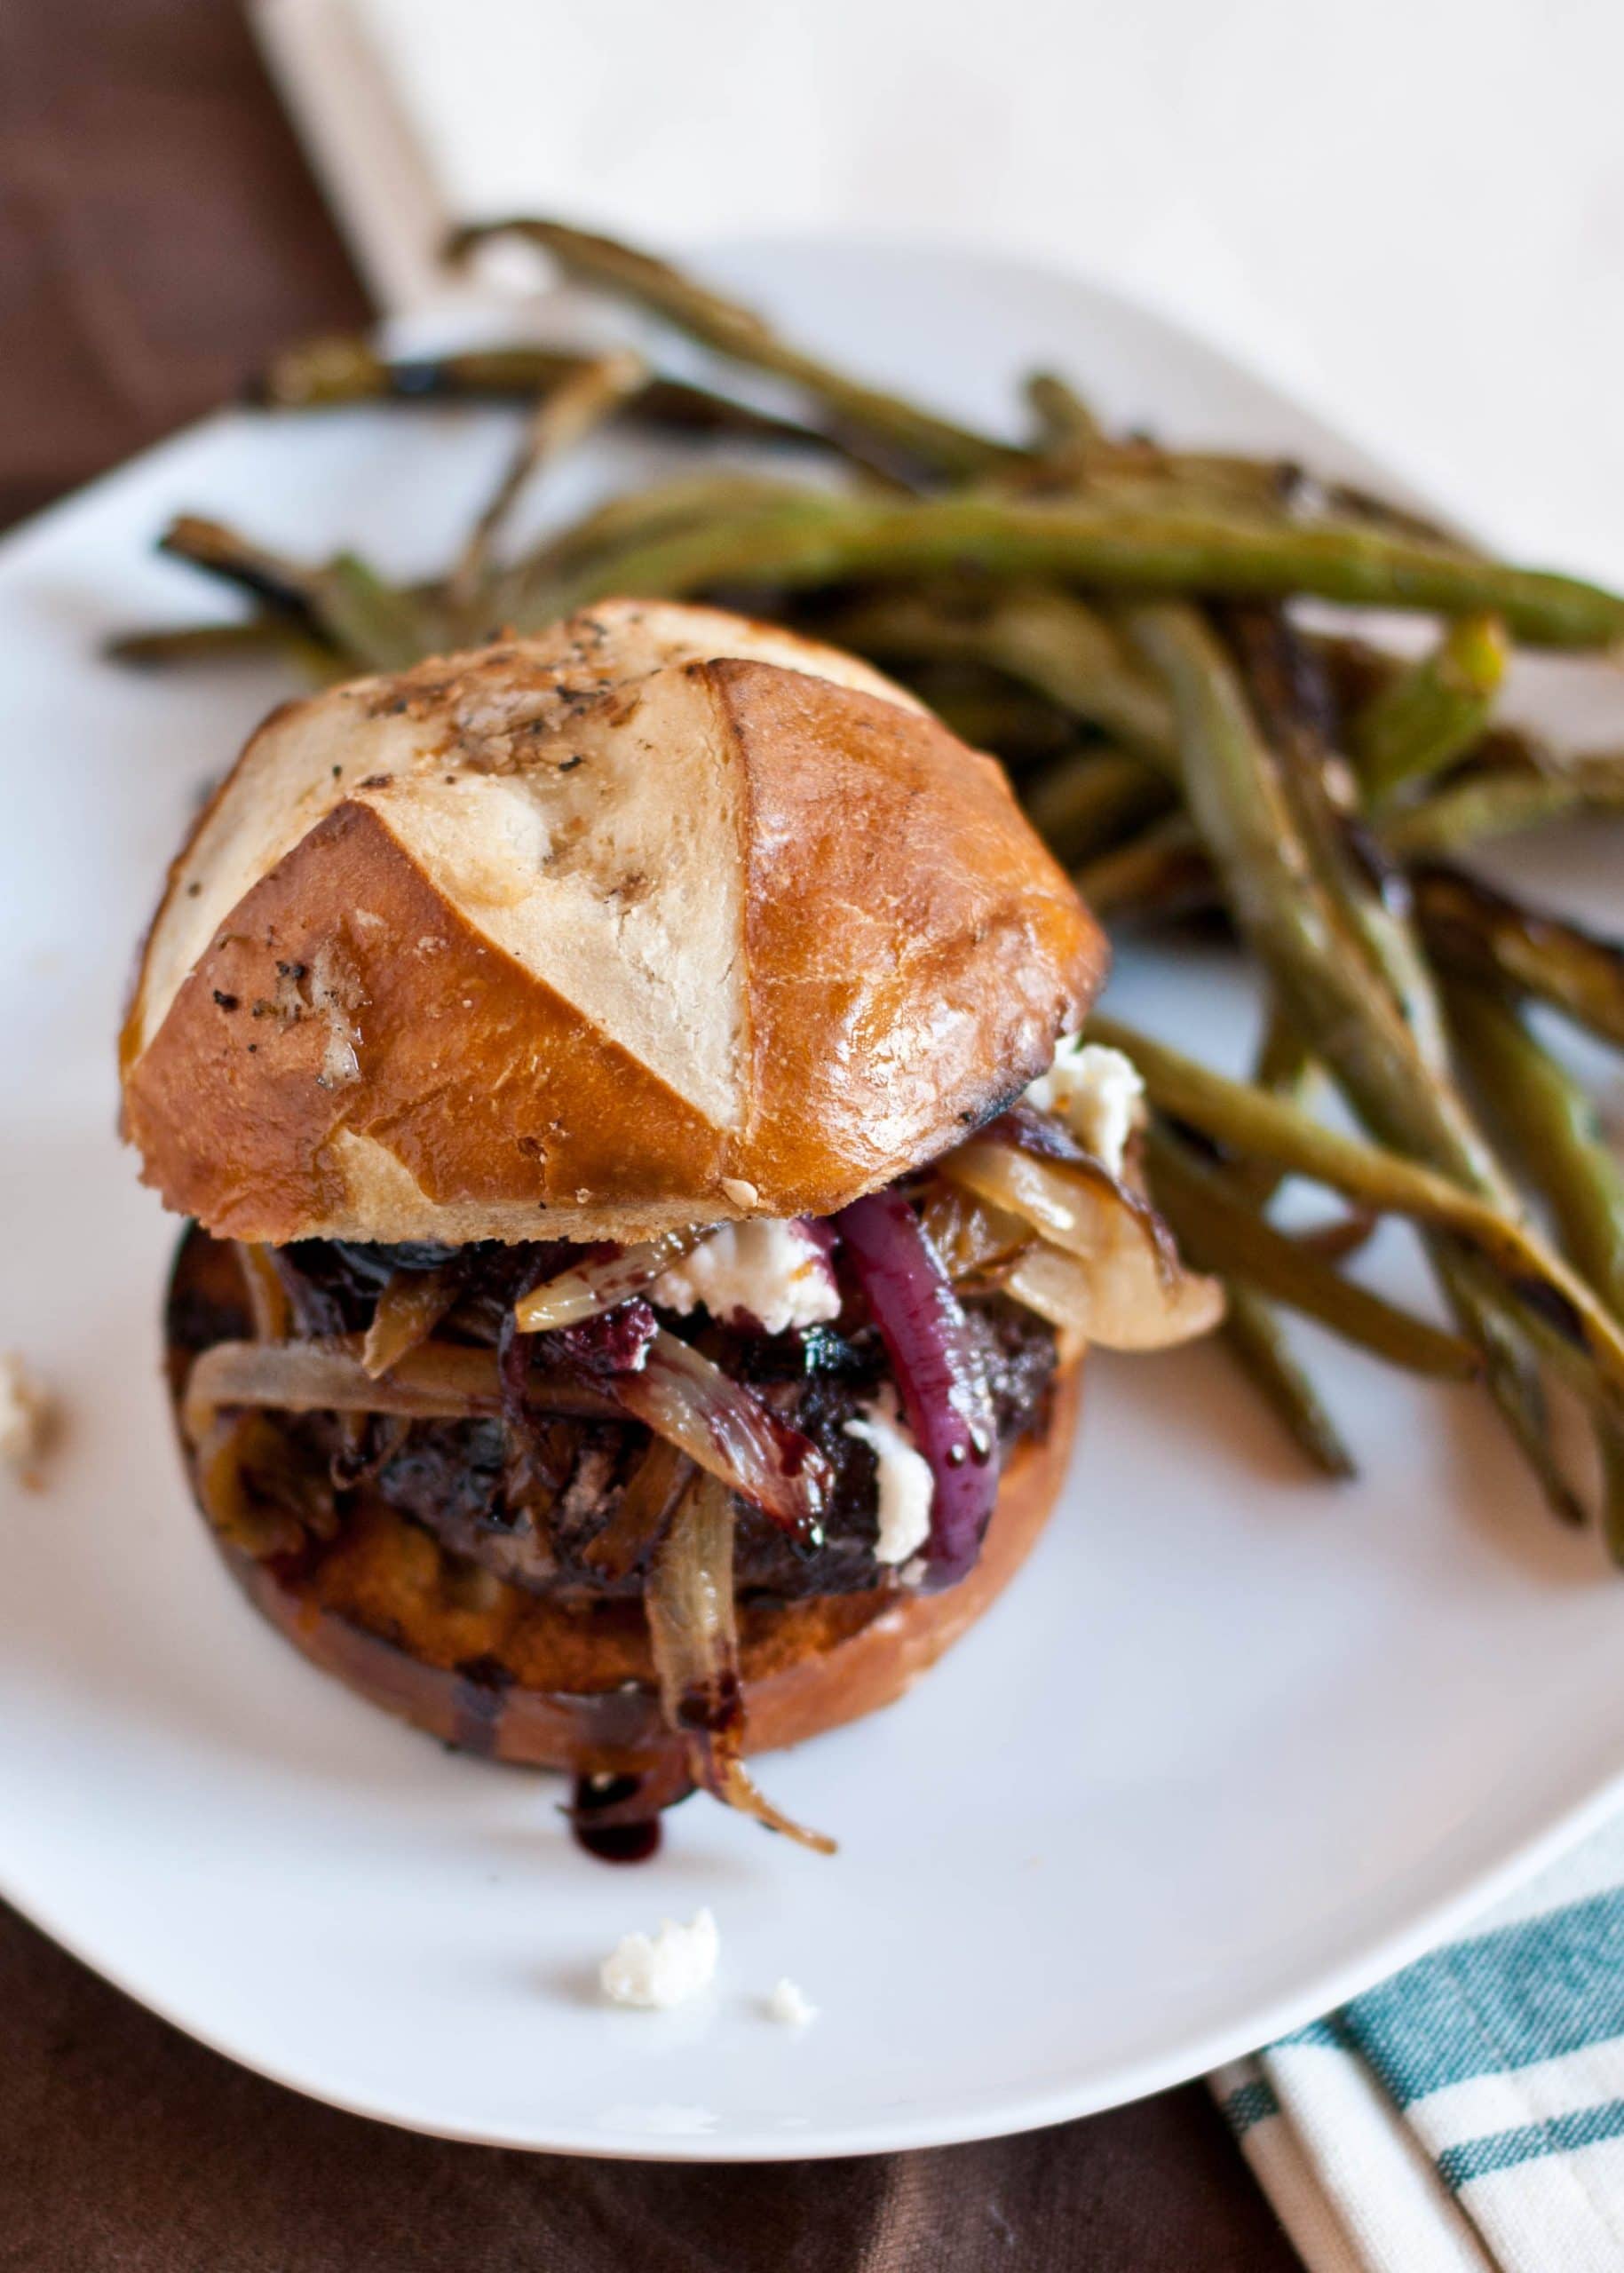 Red Wine Burgers with Caramelized Onions and Goat Cheese | Neighborfoodblog.com